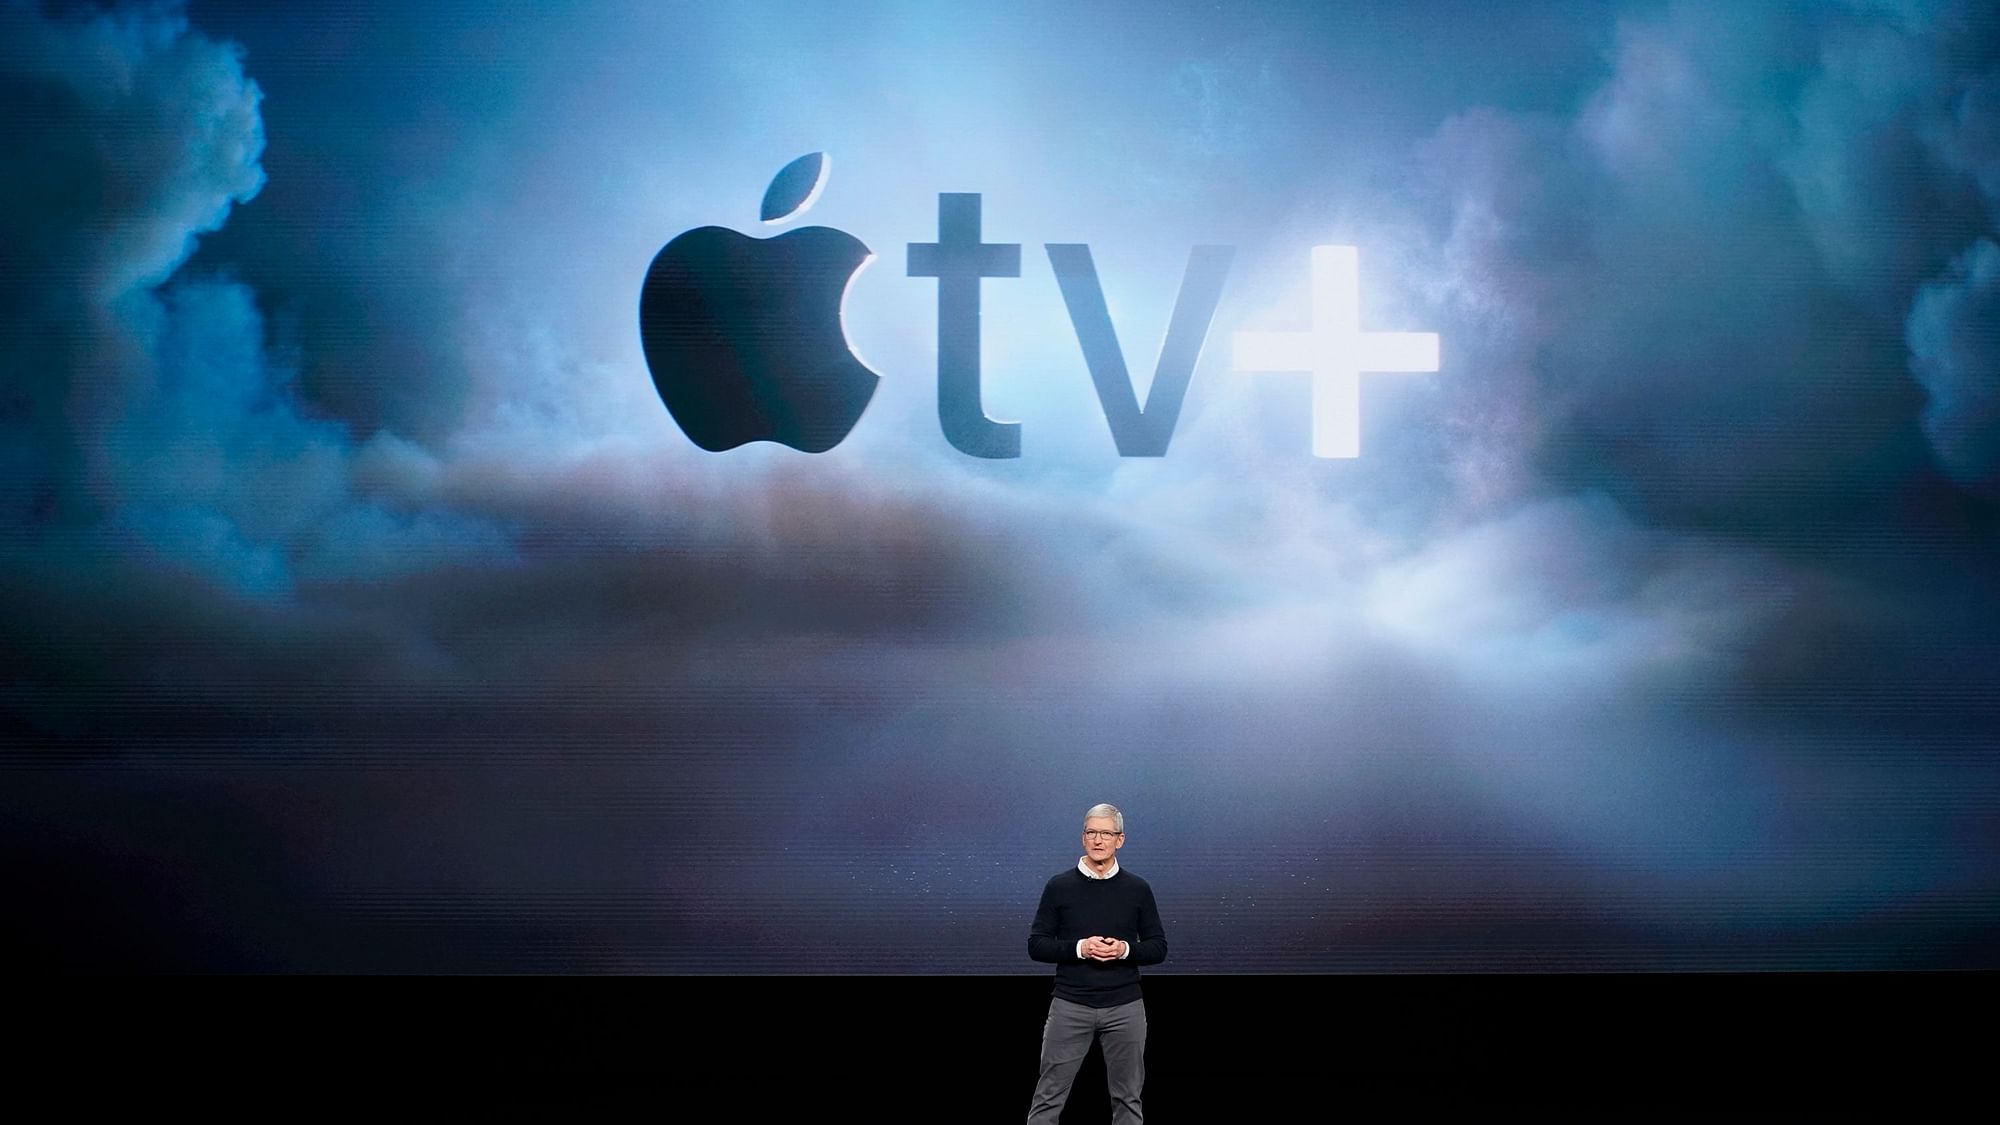 Apple CEO Tim Cook speaks at the Steve Jobs Theater during an event to announce new products.